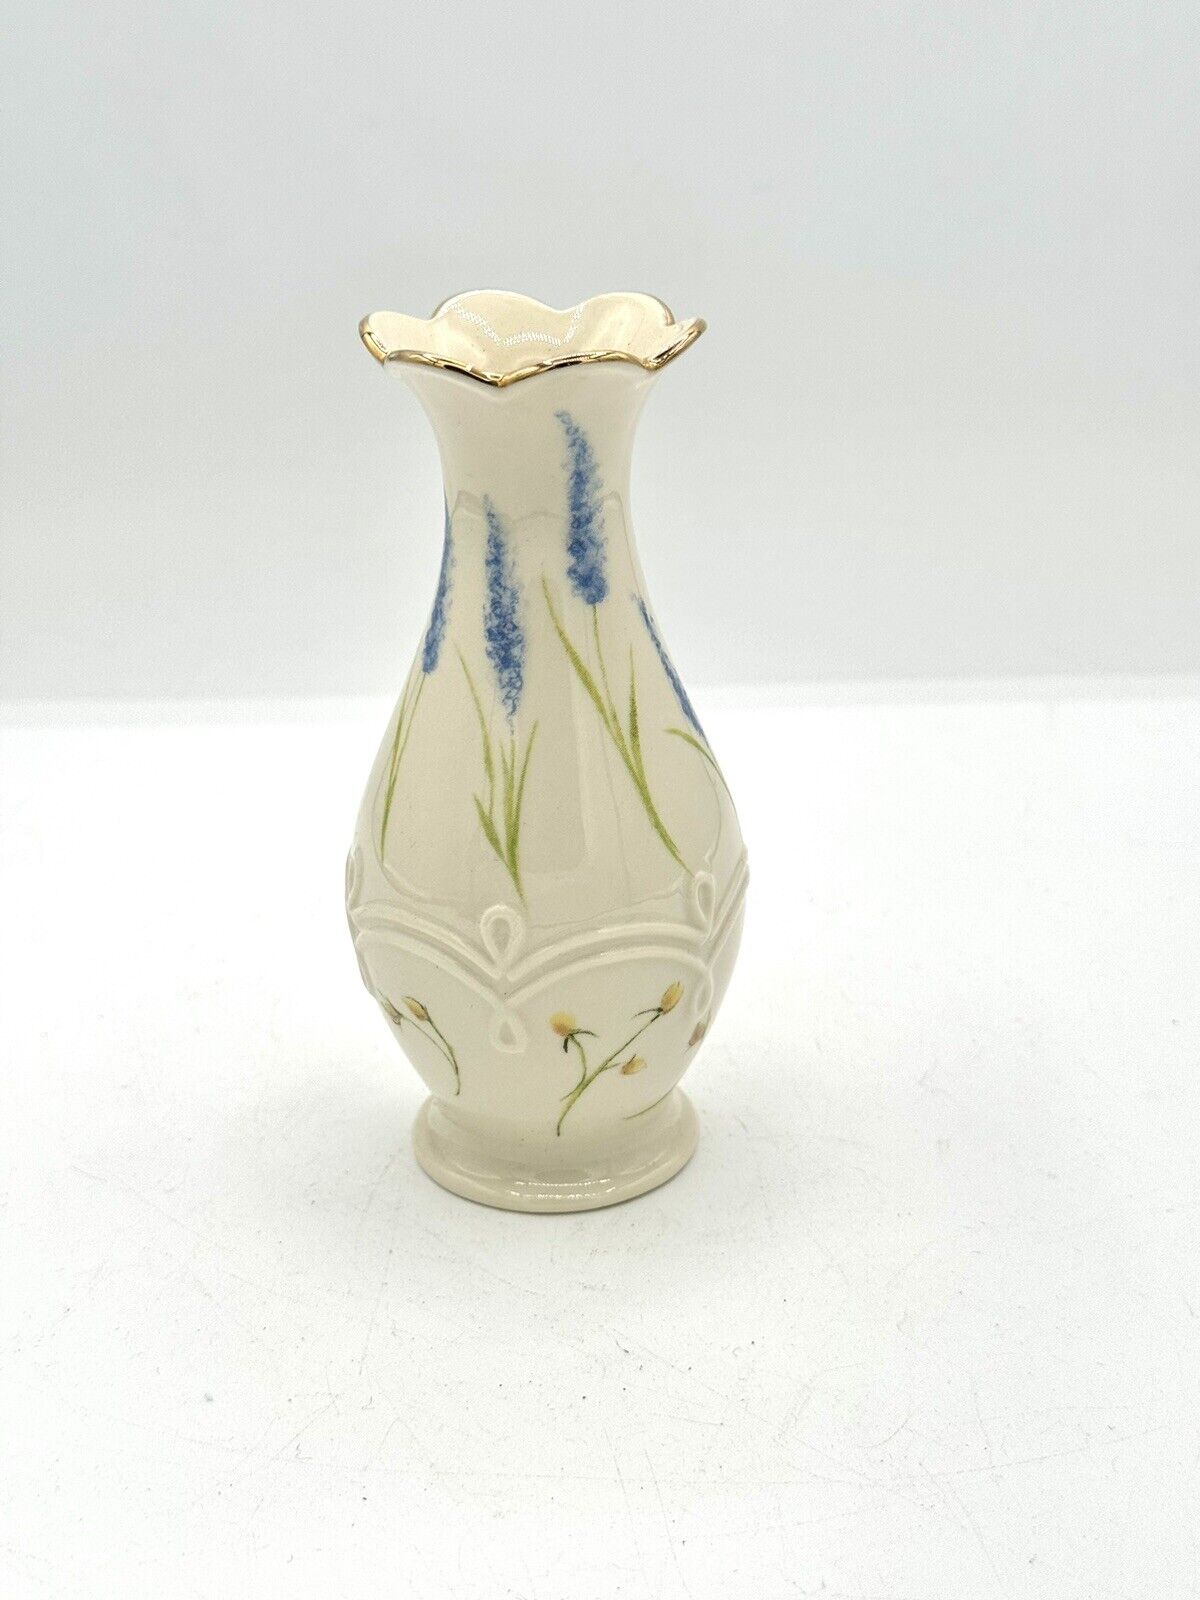 CLASSIC LENOX FLORAL BUD VASE HIGH GLOSS FINISH WITH GOLD TRIM 5